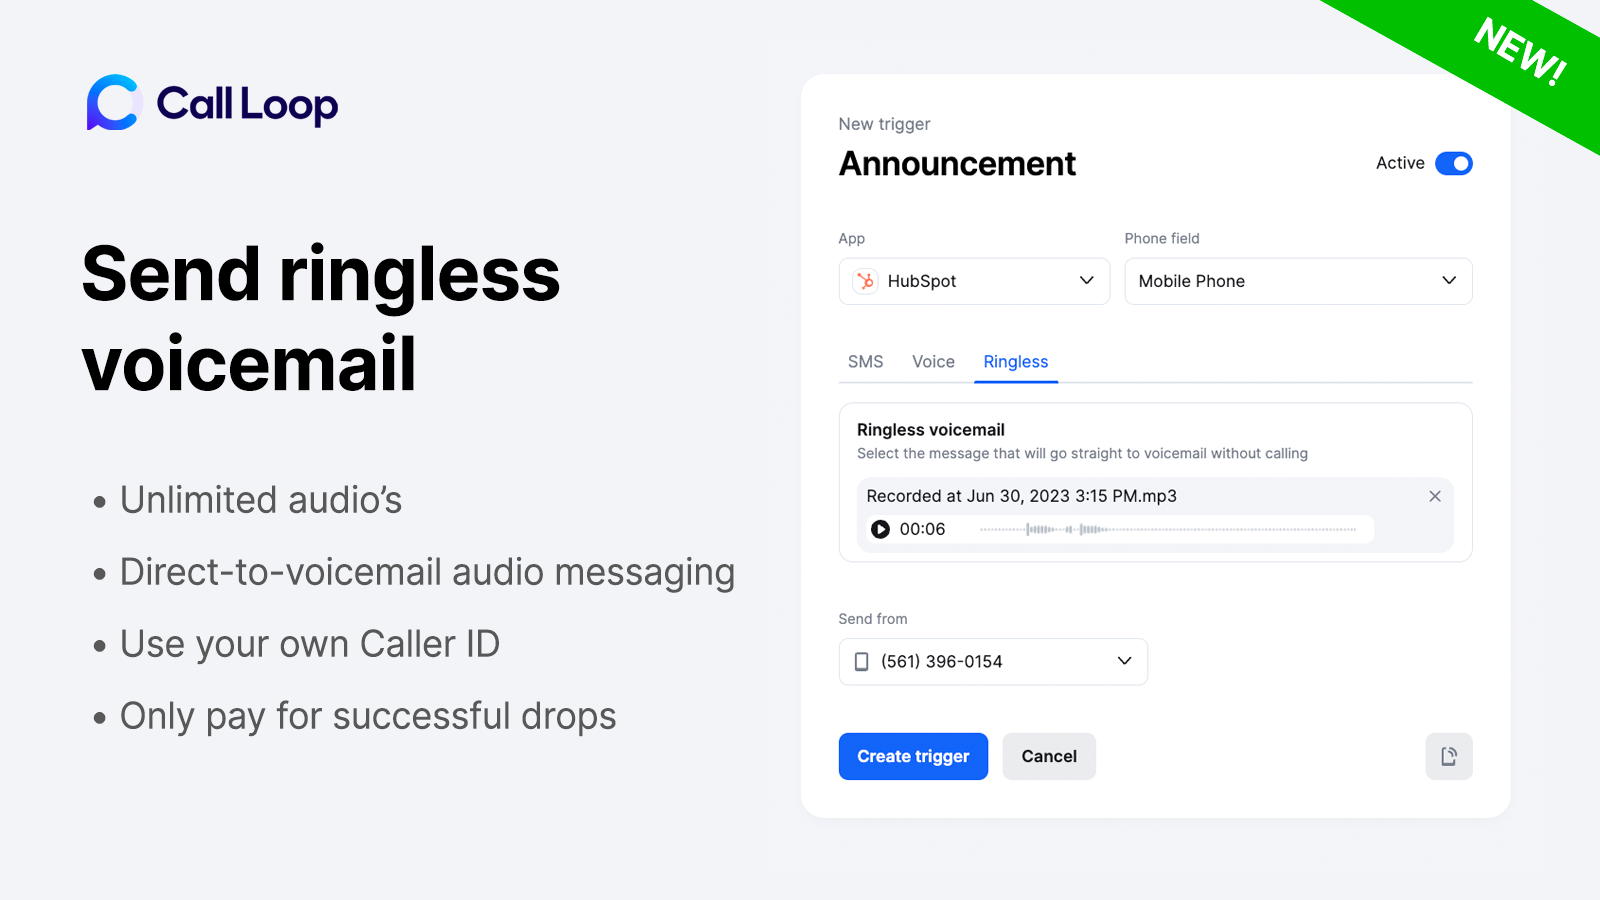 Send ringless voicemails to a group and drop your audio message direct-to-voicemail.